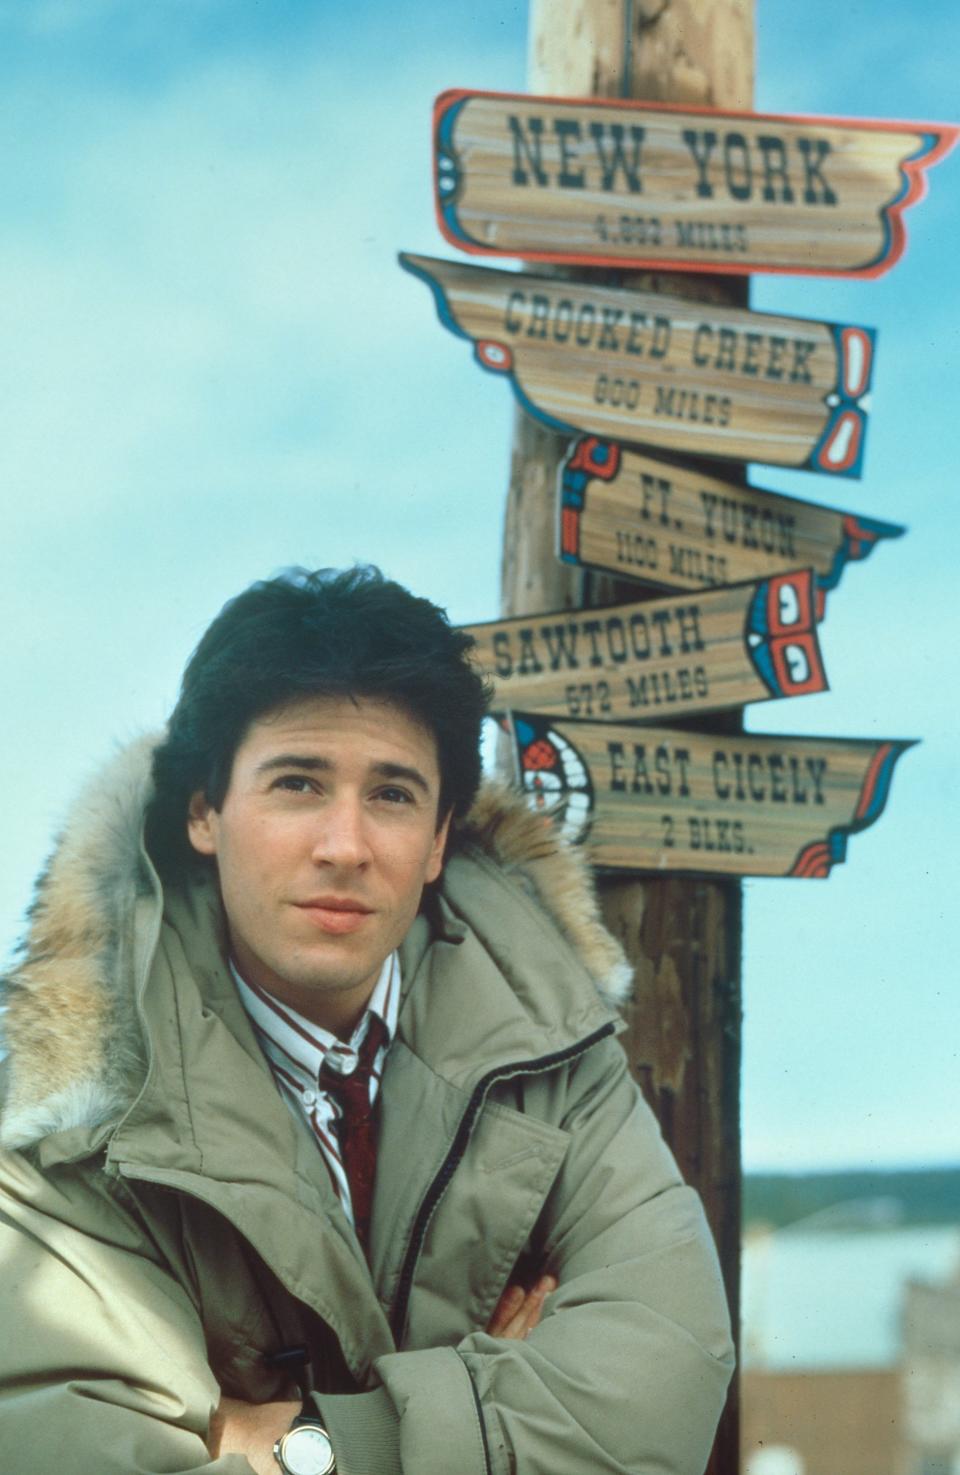 Man in parka by signpost with directional signs; relevant for "Northern Exposure" TV show